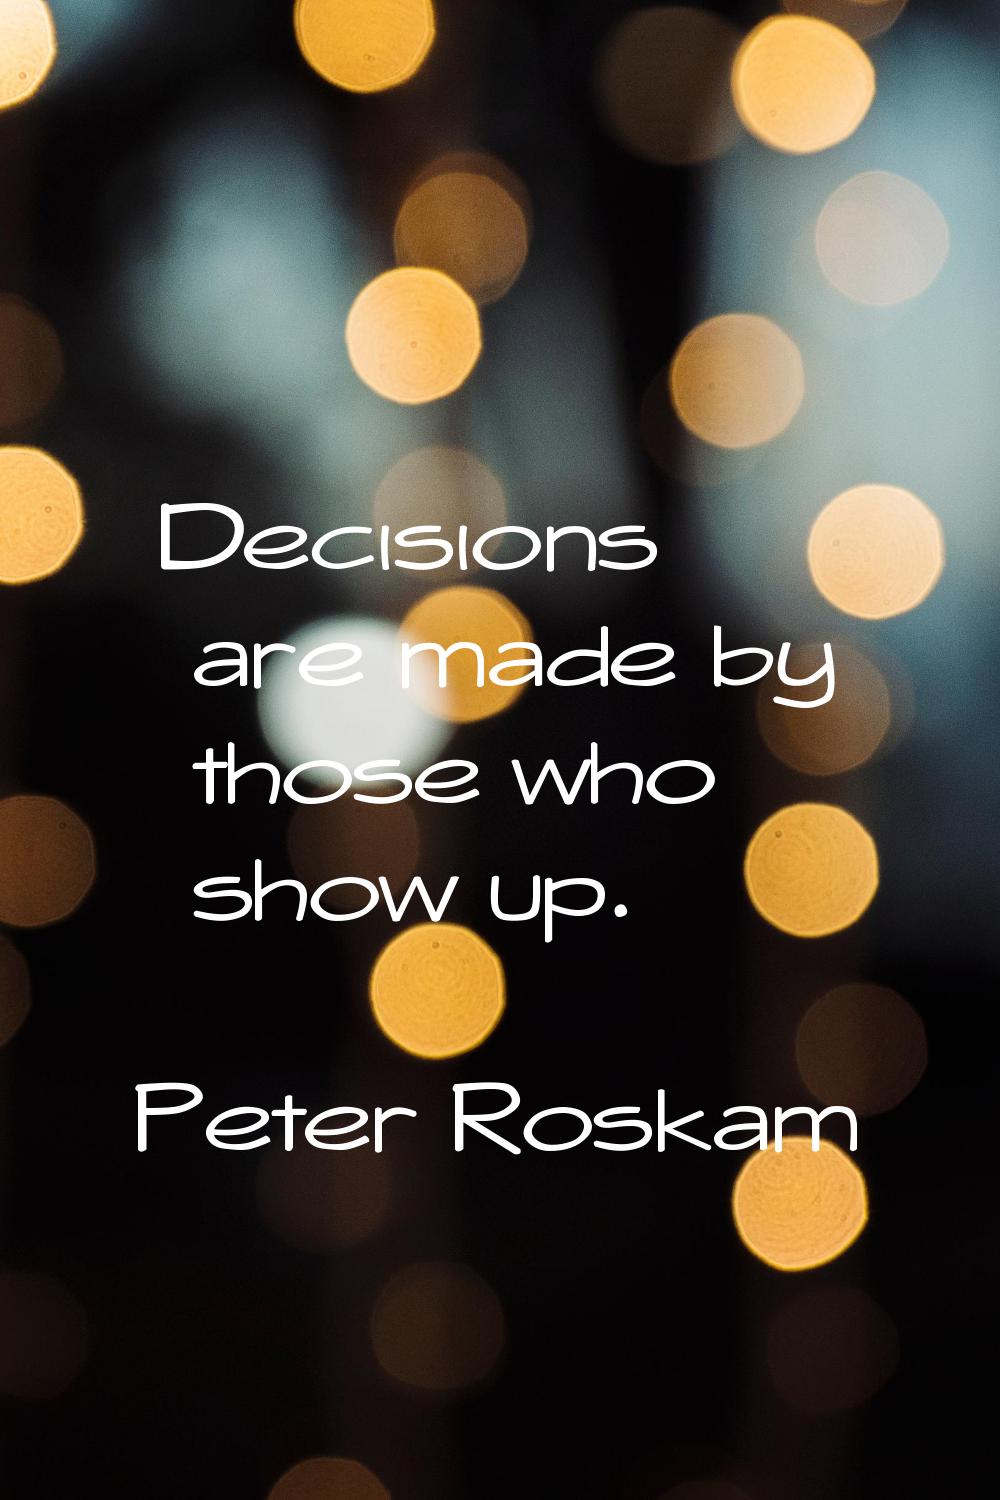 Decisions are made by those who show up.